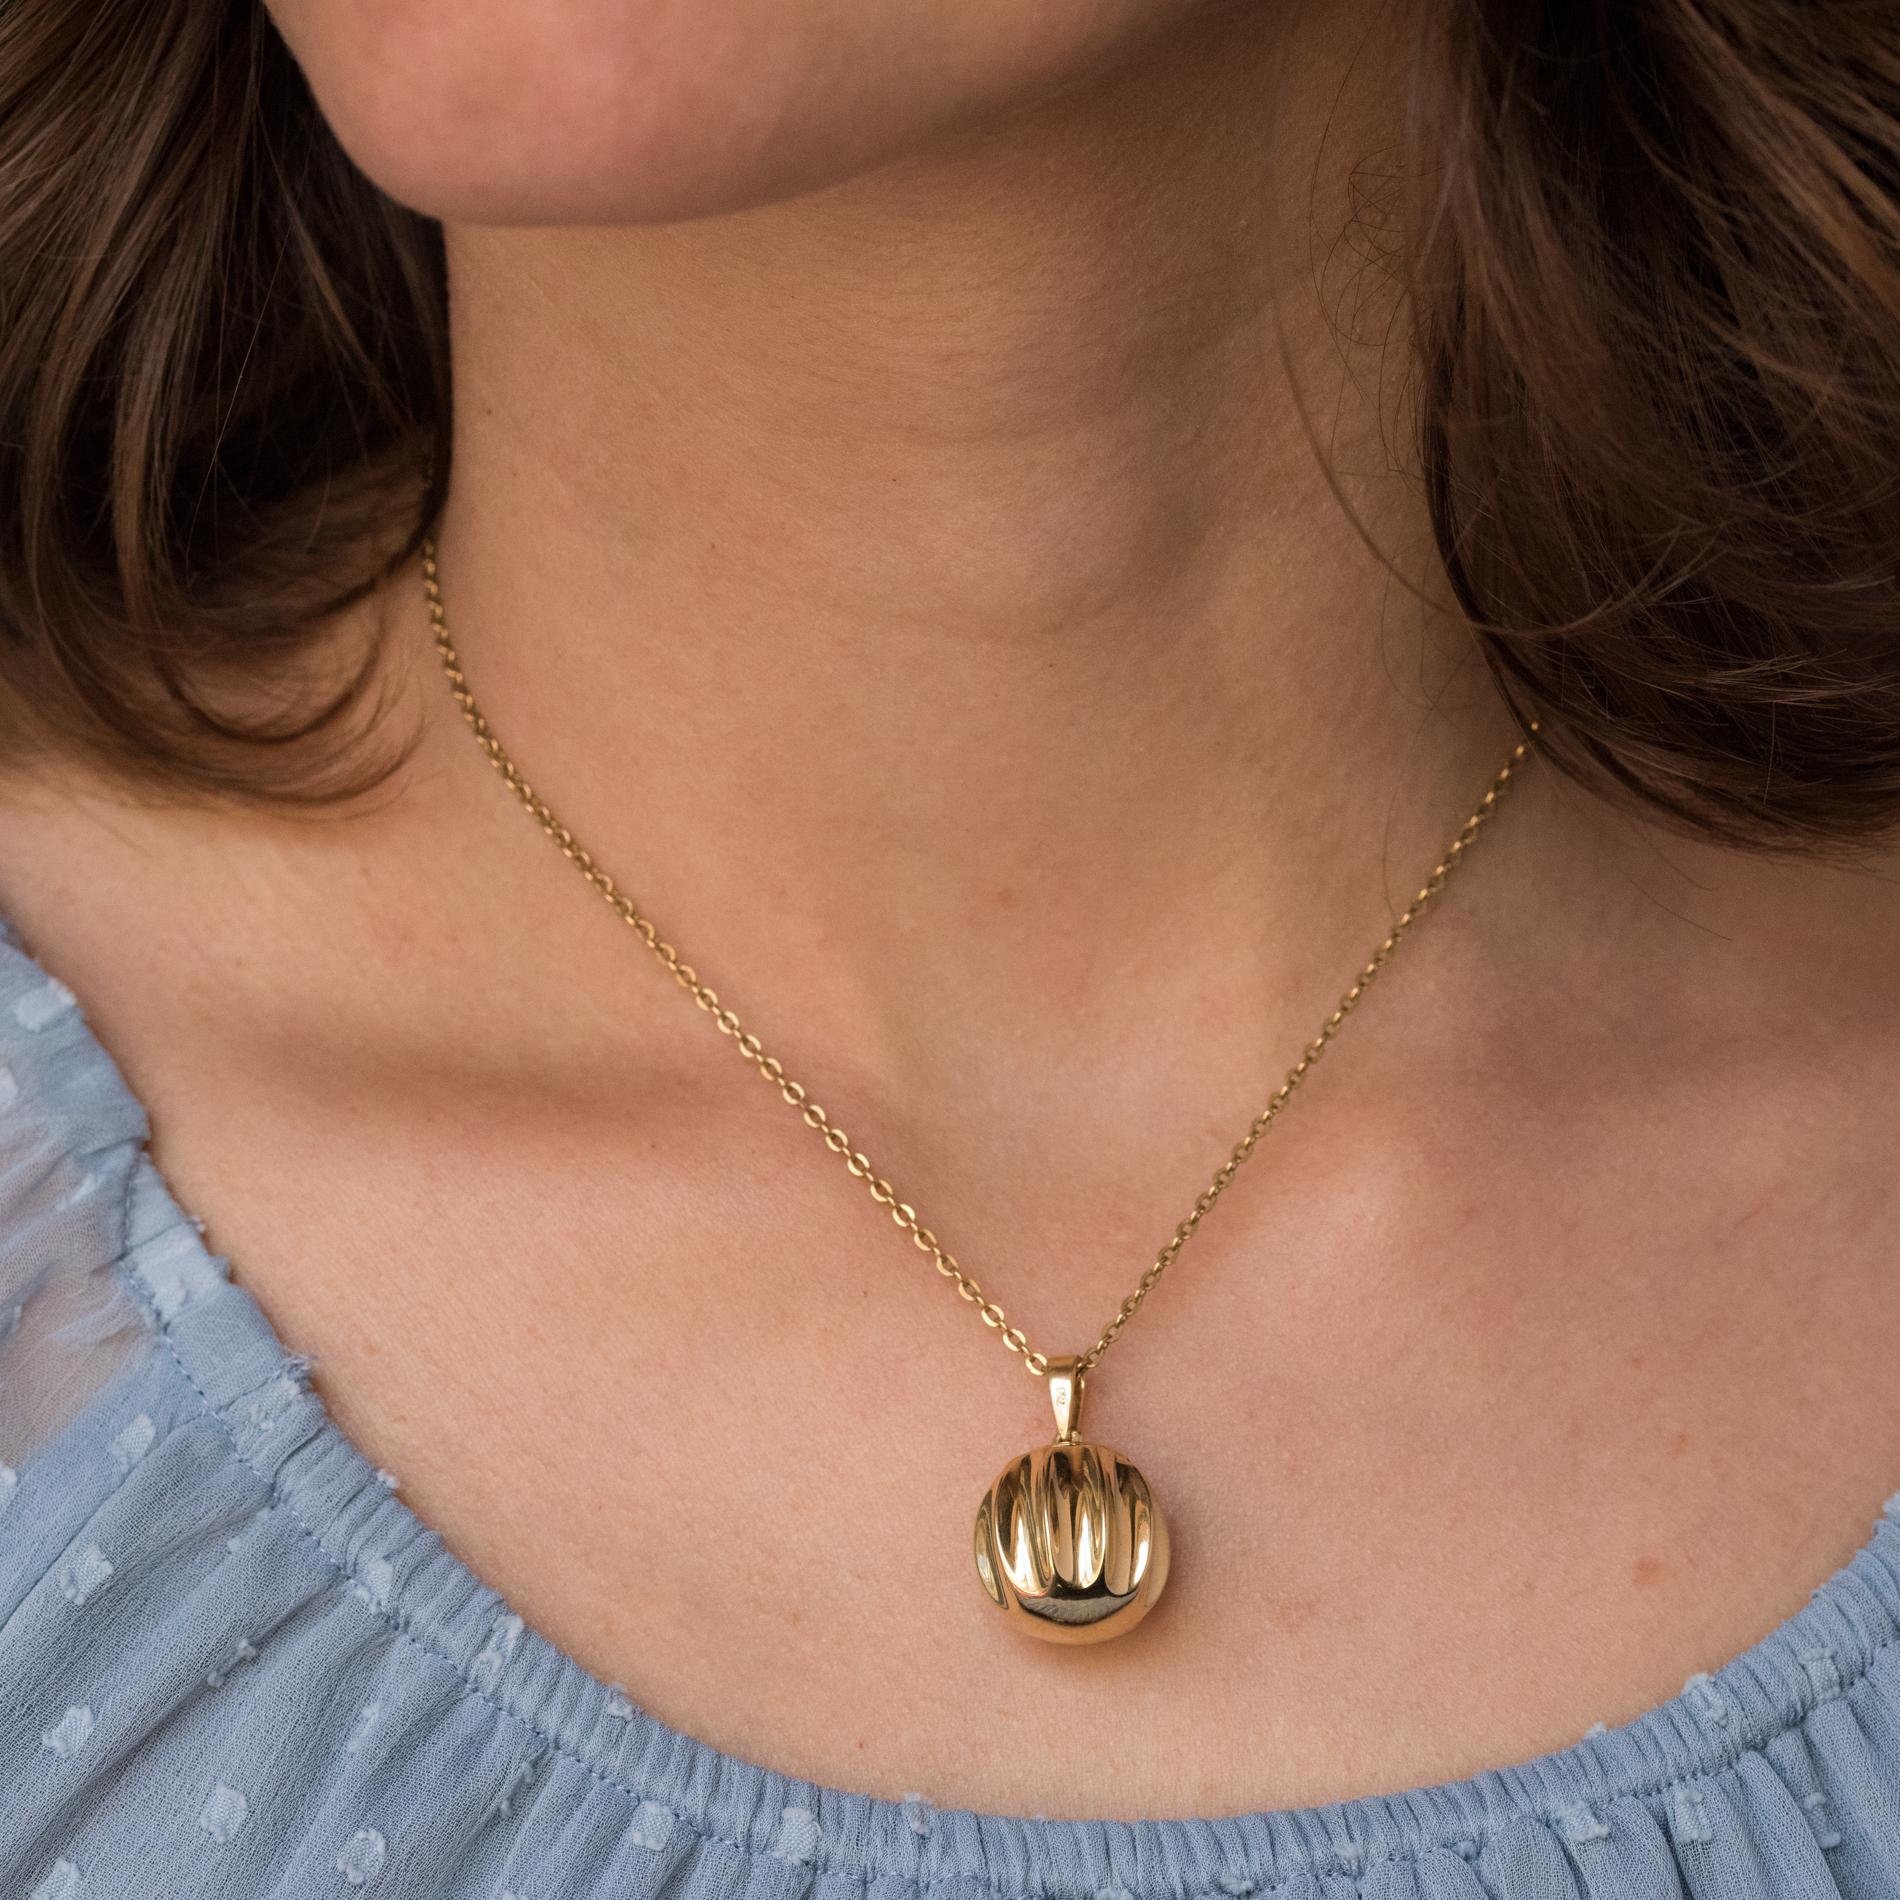 Pendant in 18 karats yellow gold.
Sphere-shaped, this very original gold pendant is covered with gadroons. It opens with a hinge on the top and reveals a space to hide a memory, a present ...
Sold alone without the presentation chain.
Height: about